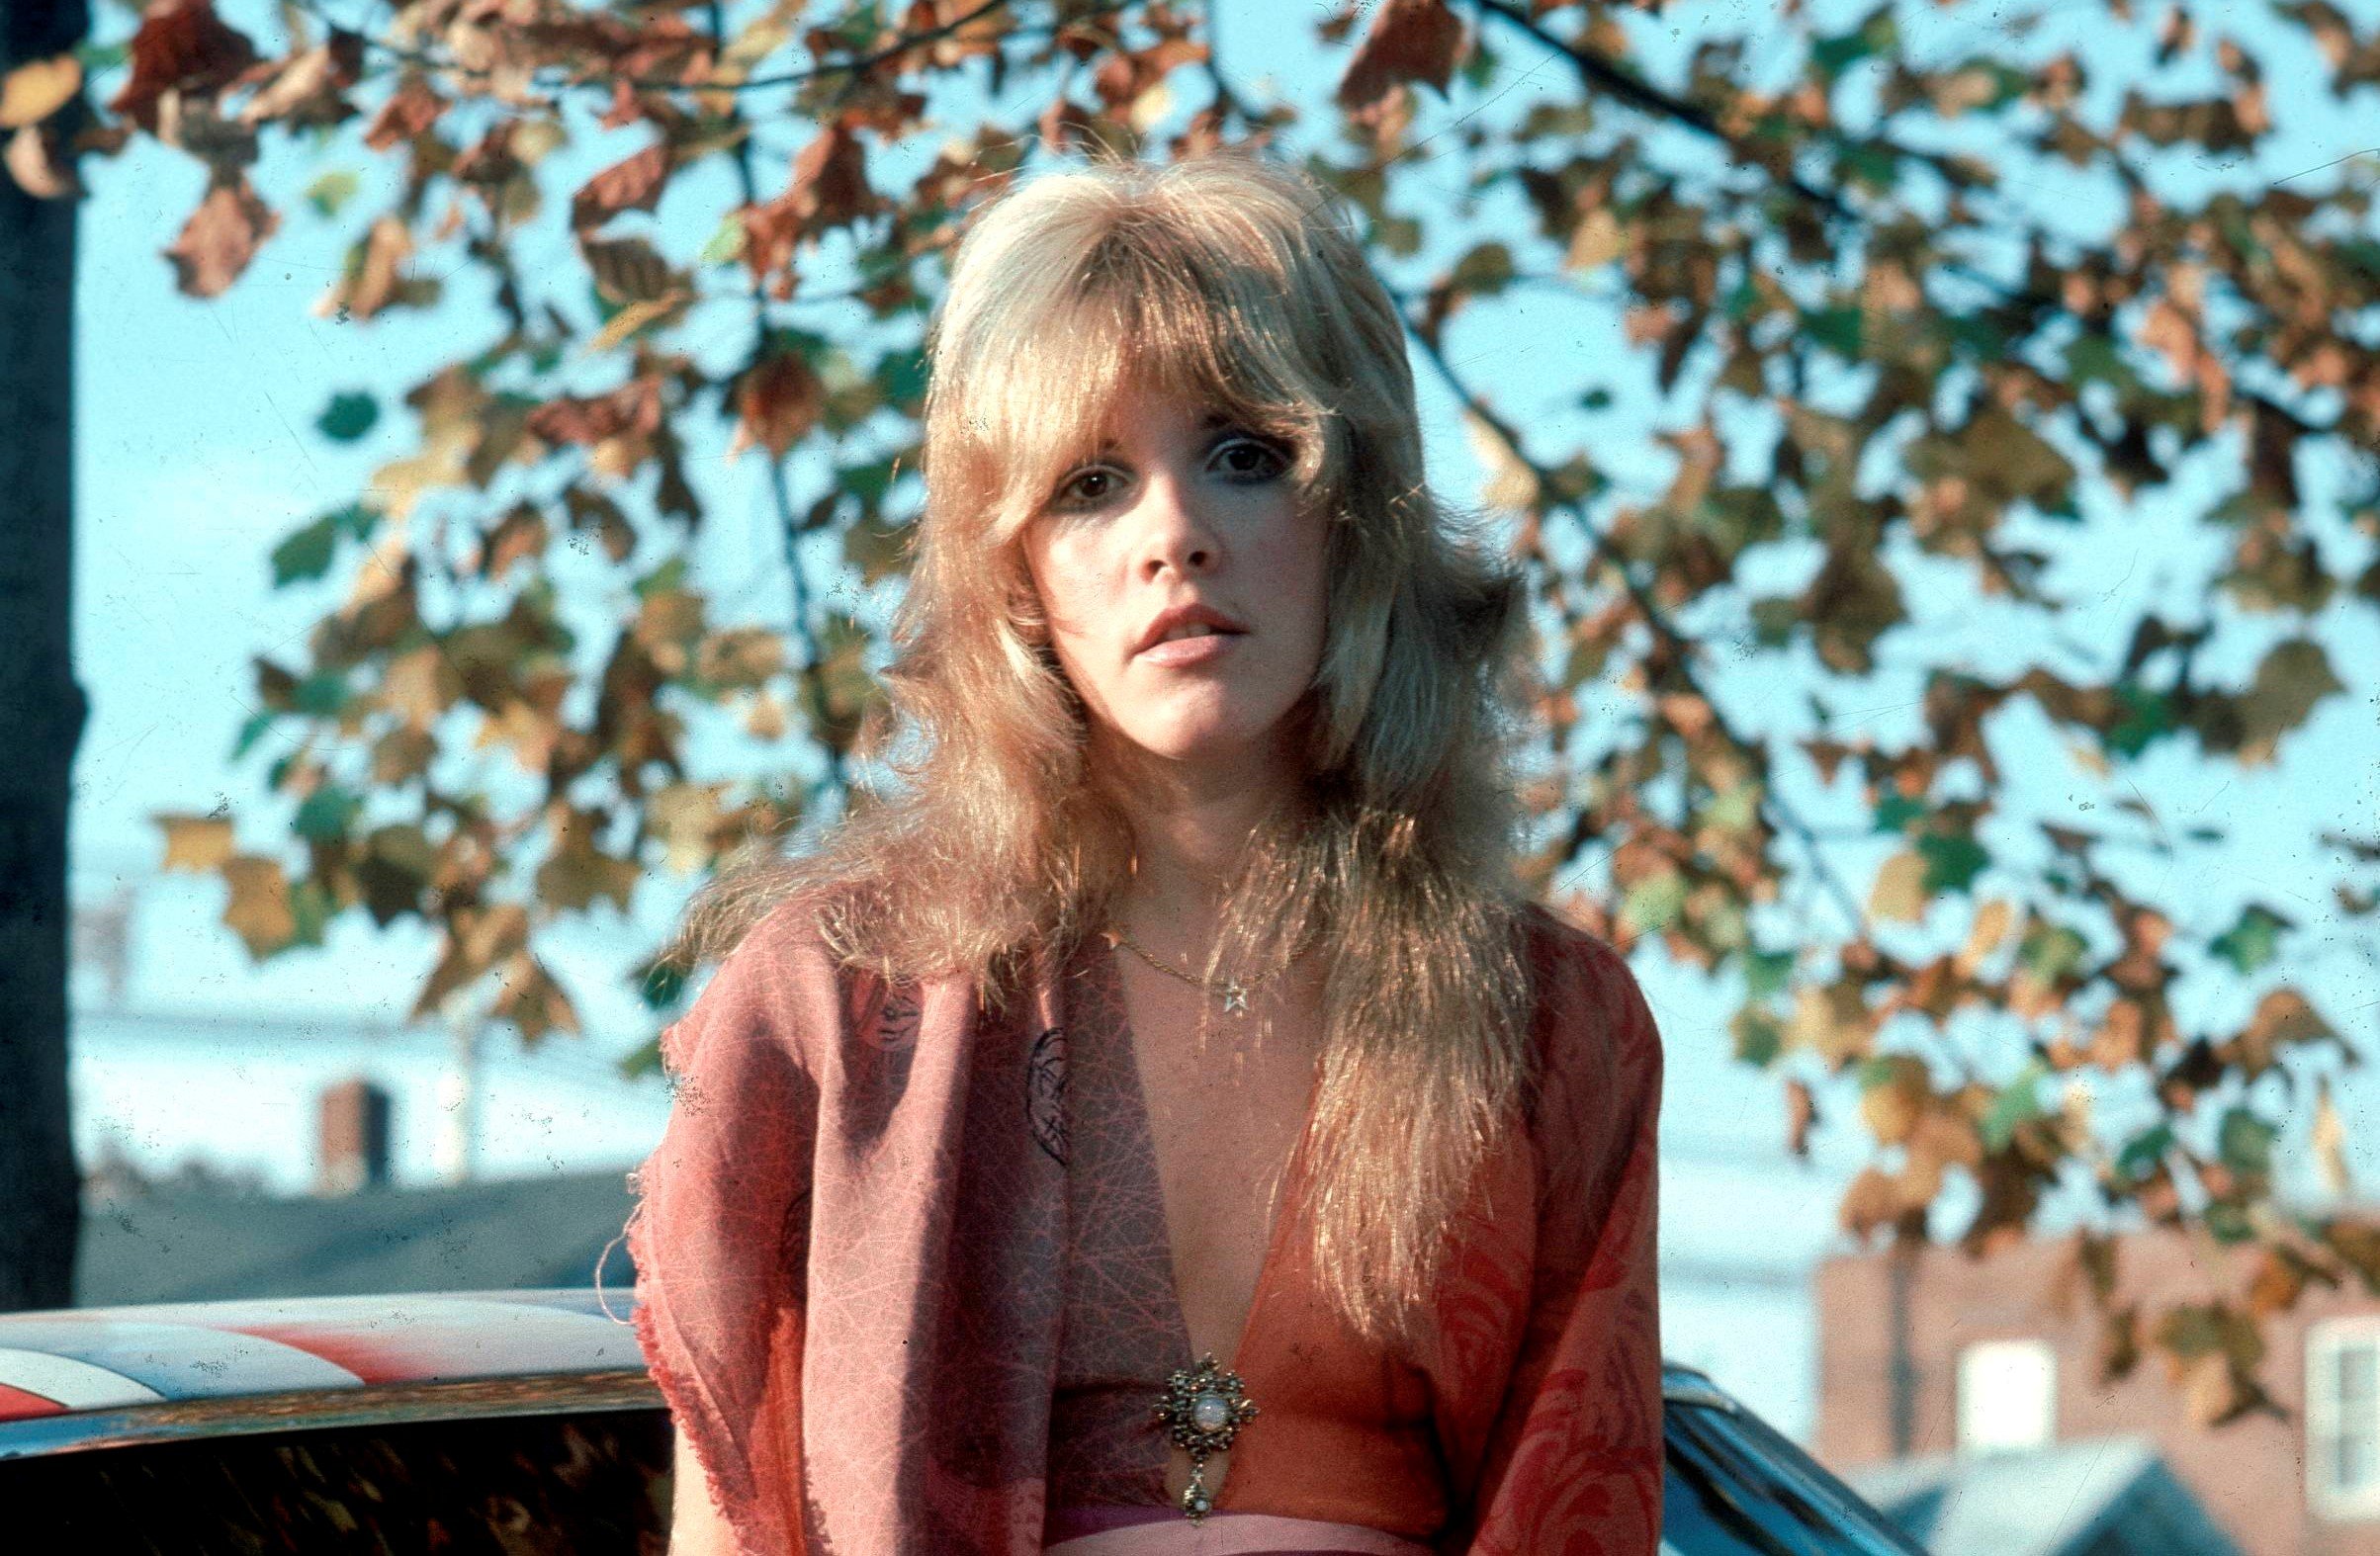 A young Stevie Nicks wears an orange shirt and sits on a car parked in front of a tree.